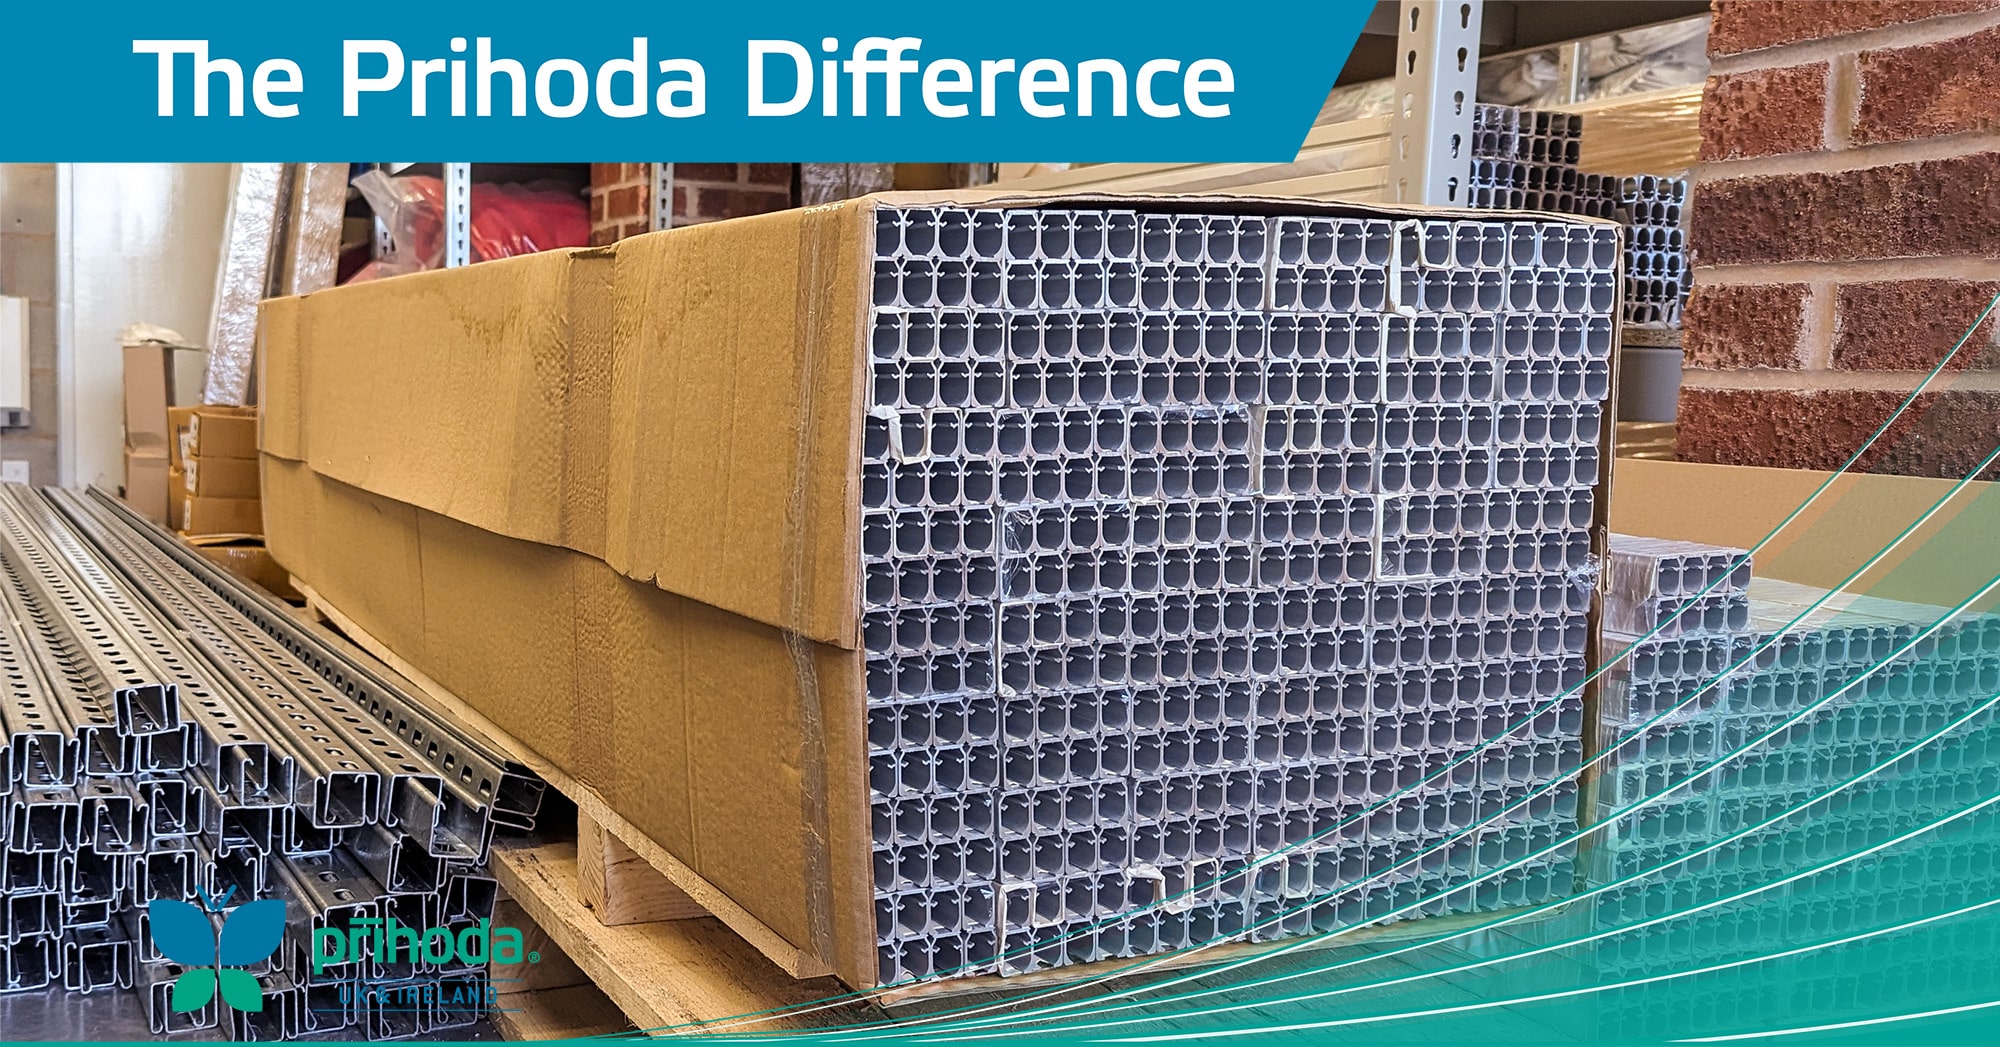 Prihoda fabric duct track in stock in the warehouse ready to go. 